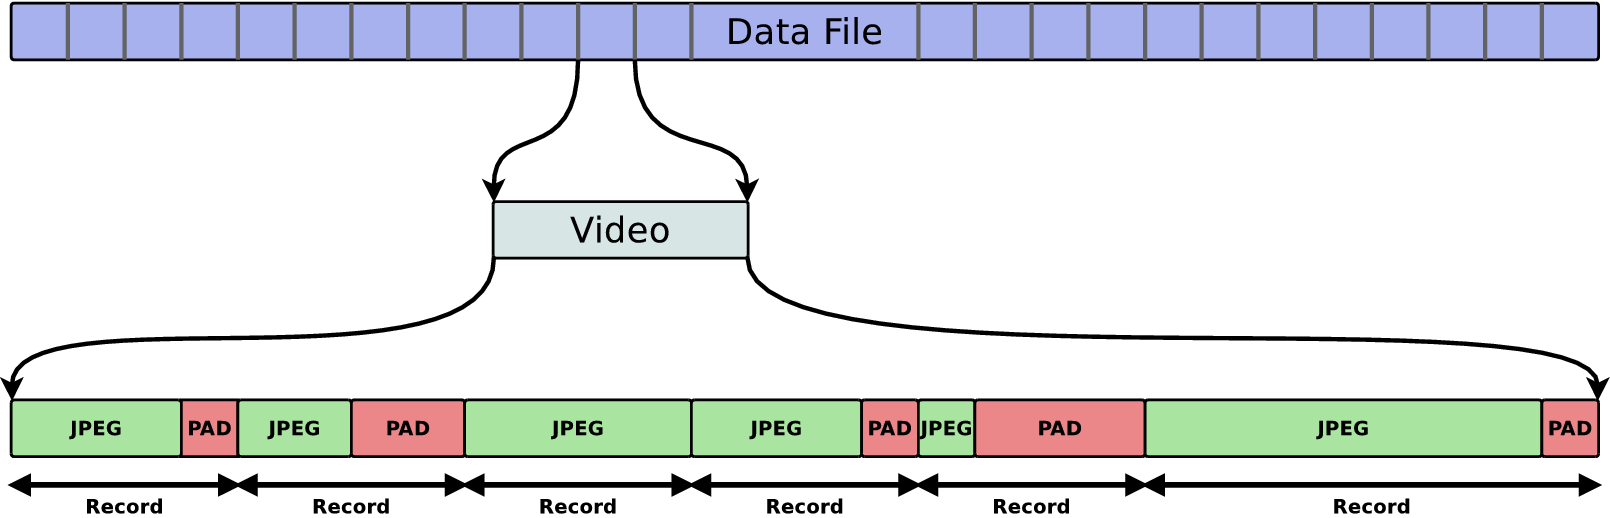 _images/data_file_layout.png